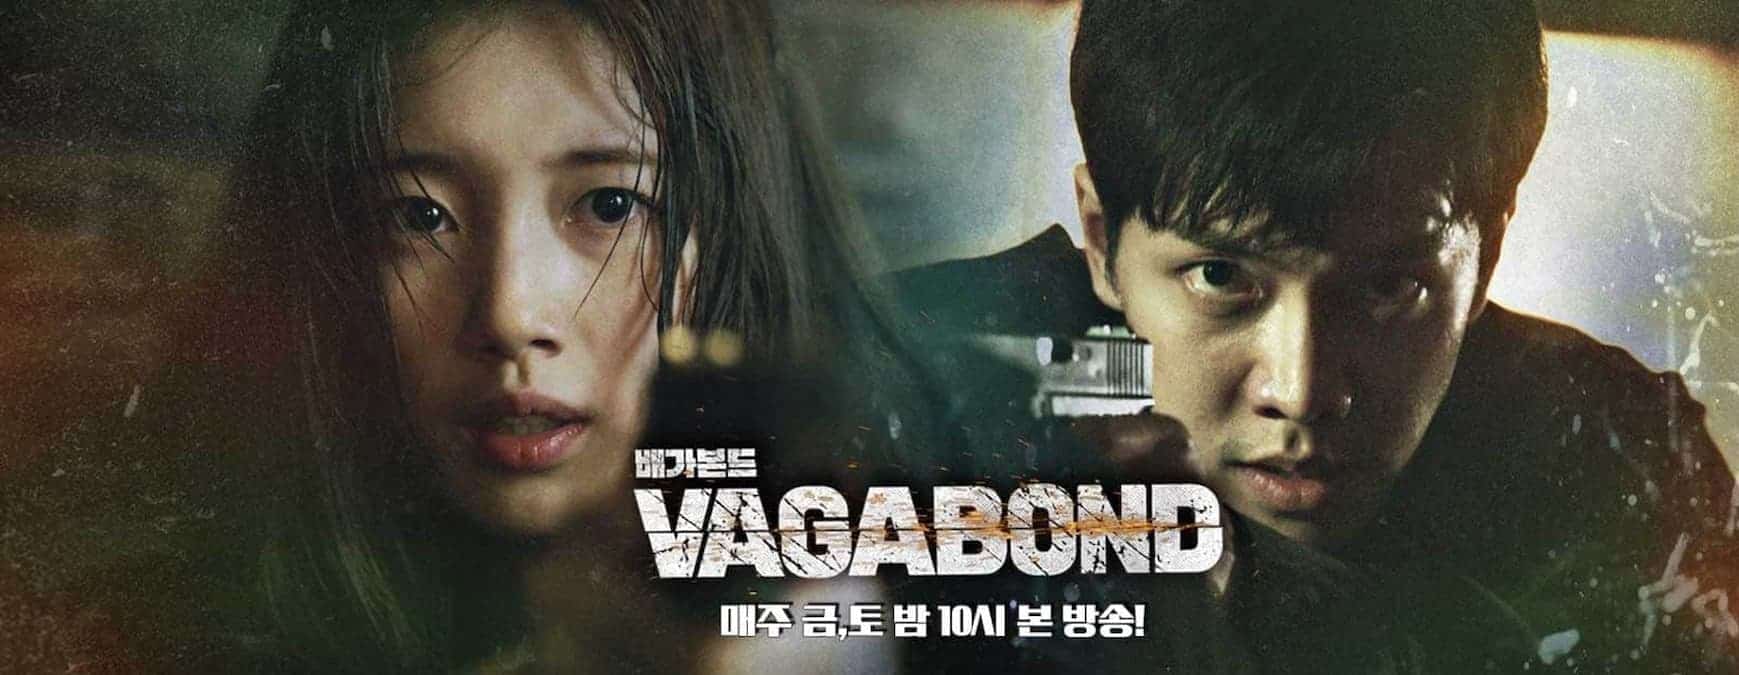 Vagabond Season 2: Date + Cast and Plot • The Awesome